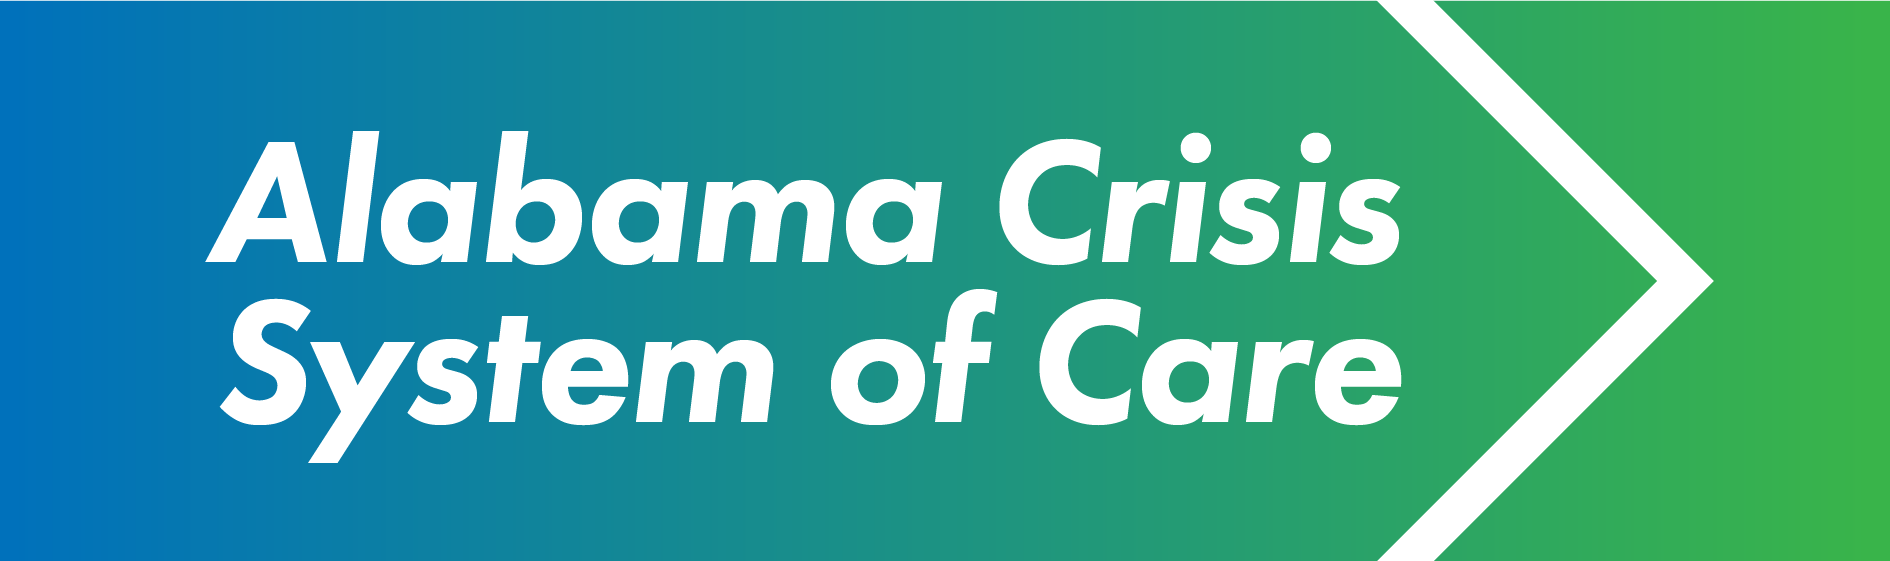 Click to learn more about the Alabama Crisis System of Care.